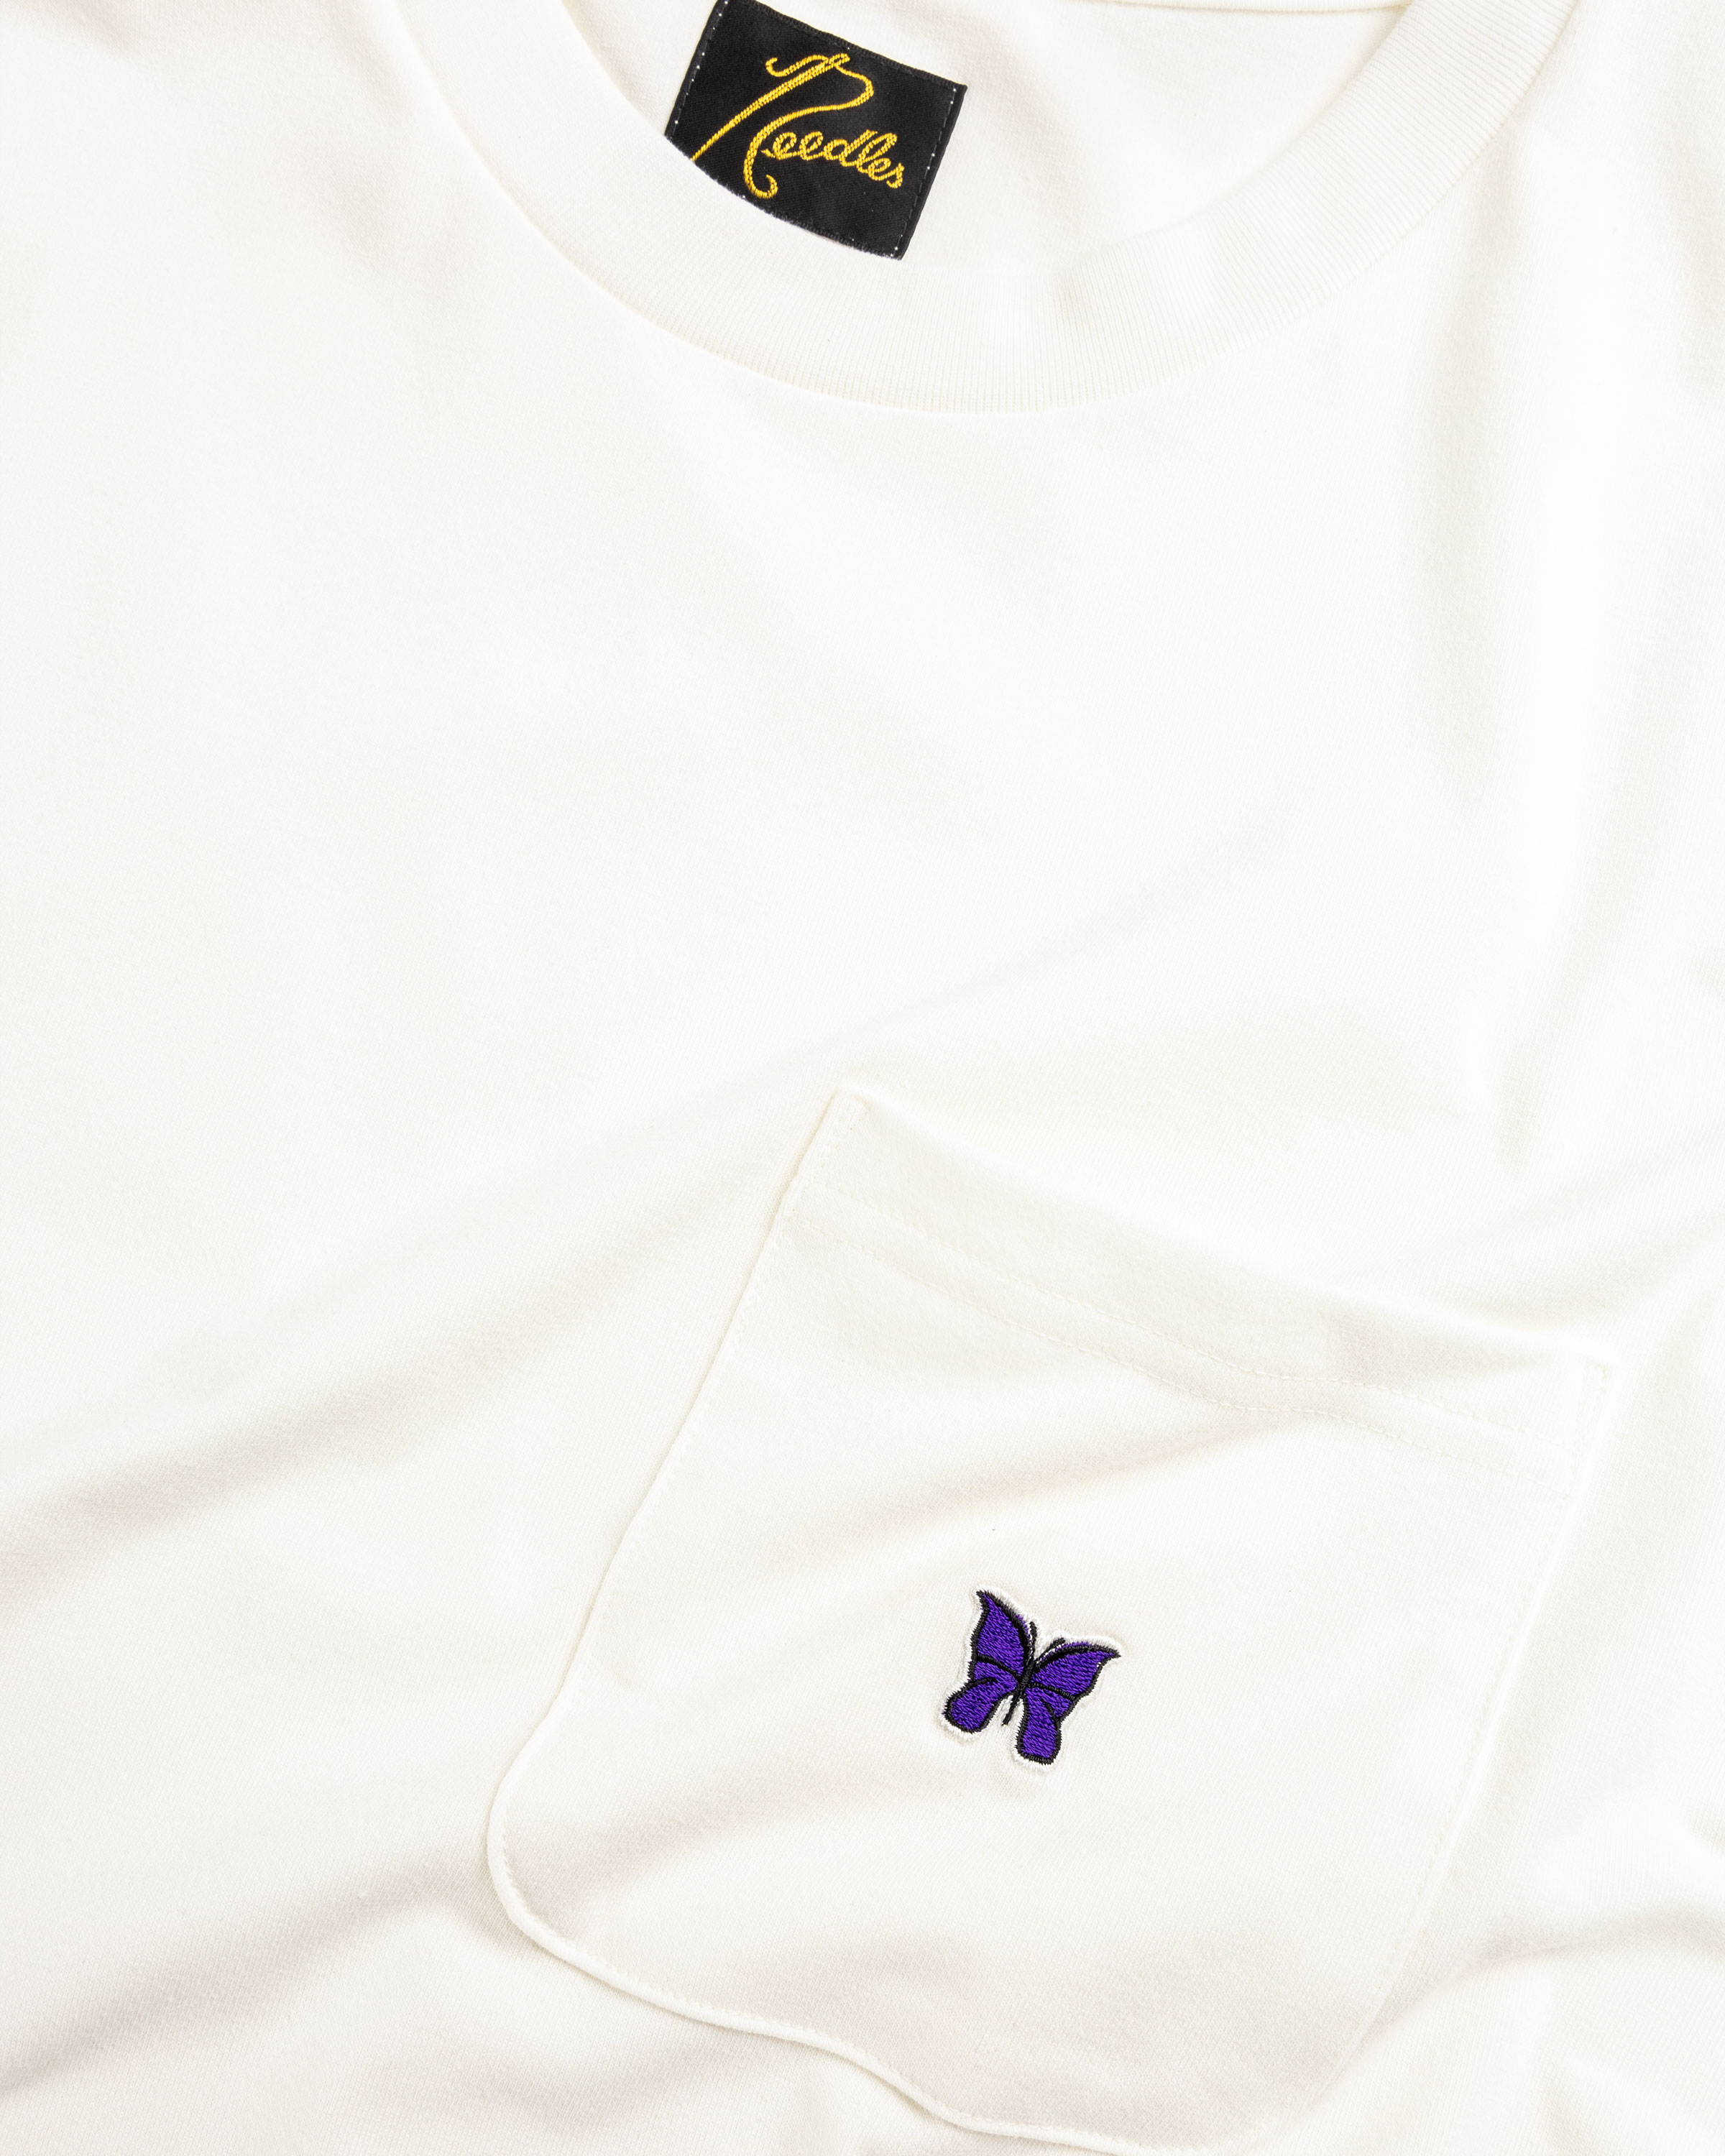 Needles – L/S Crew Neck Tee Poly Jersey White - Longsleeves - White - Image 6